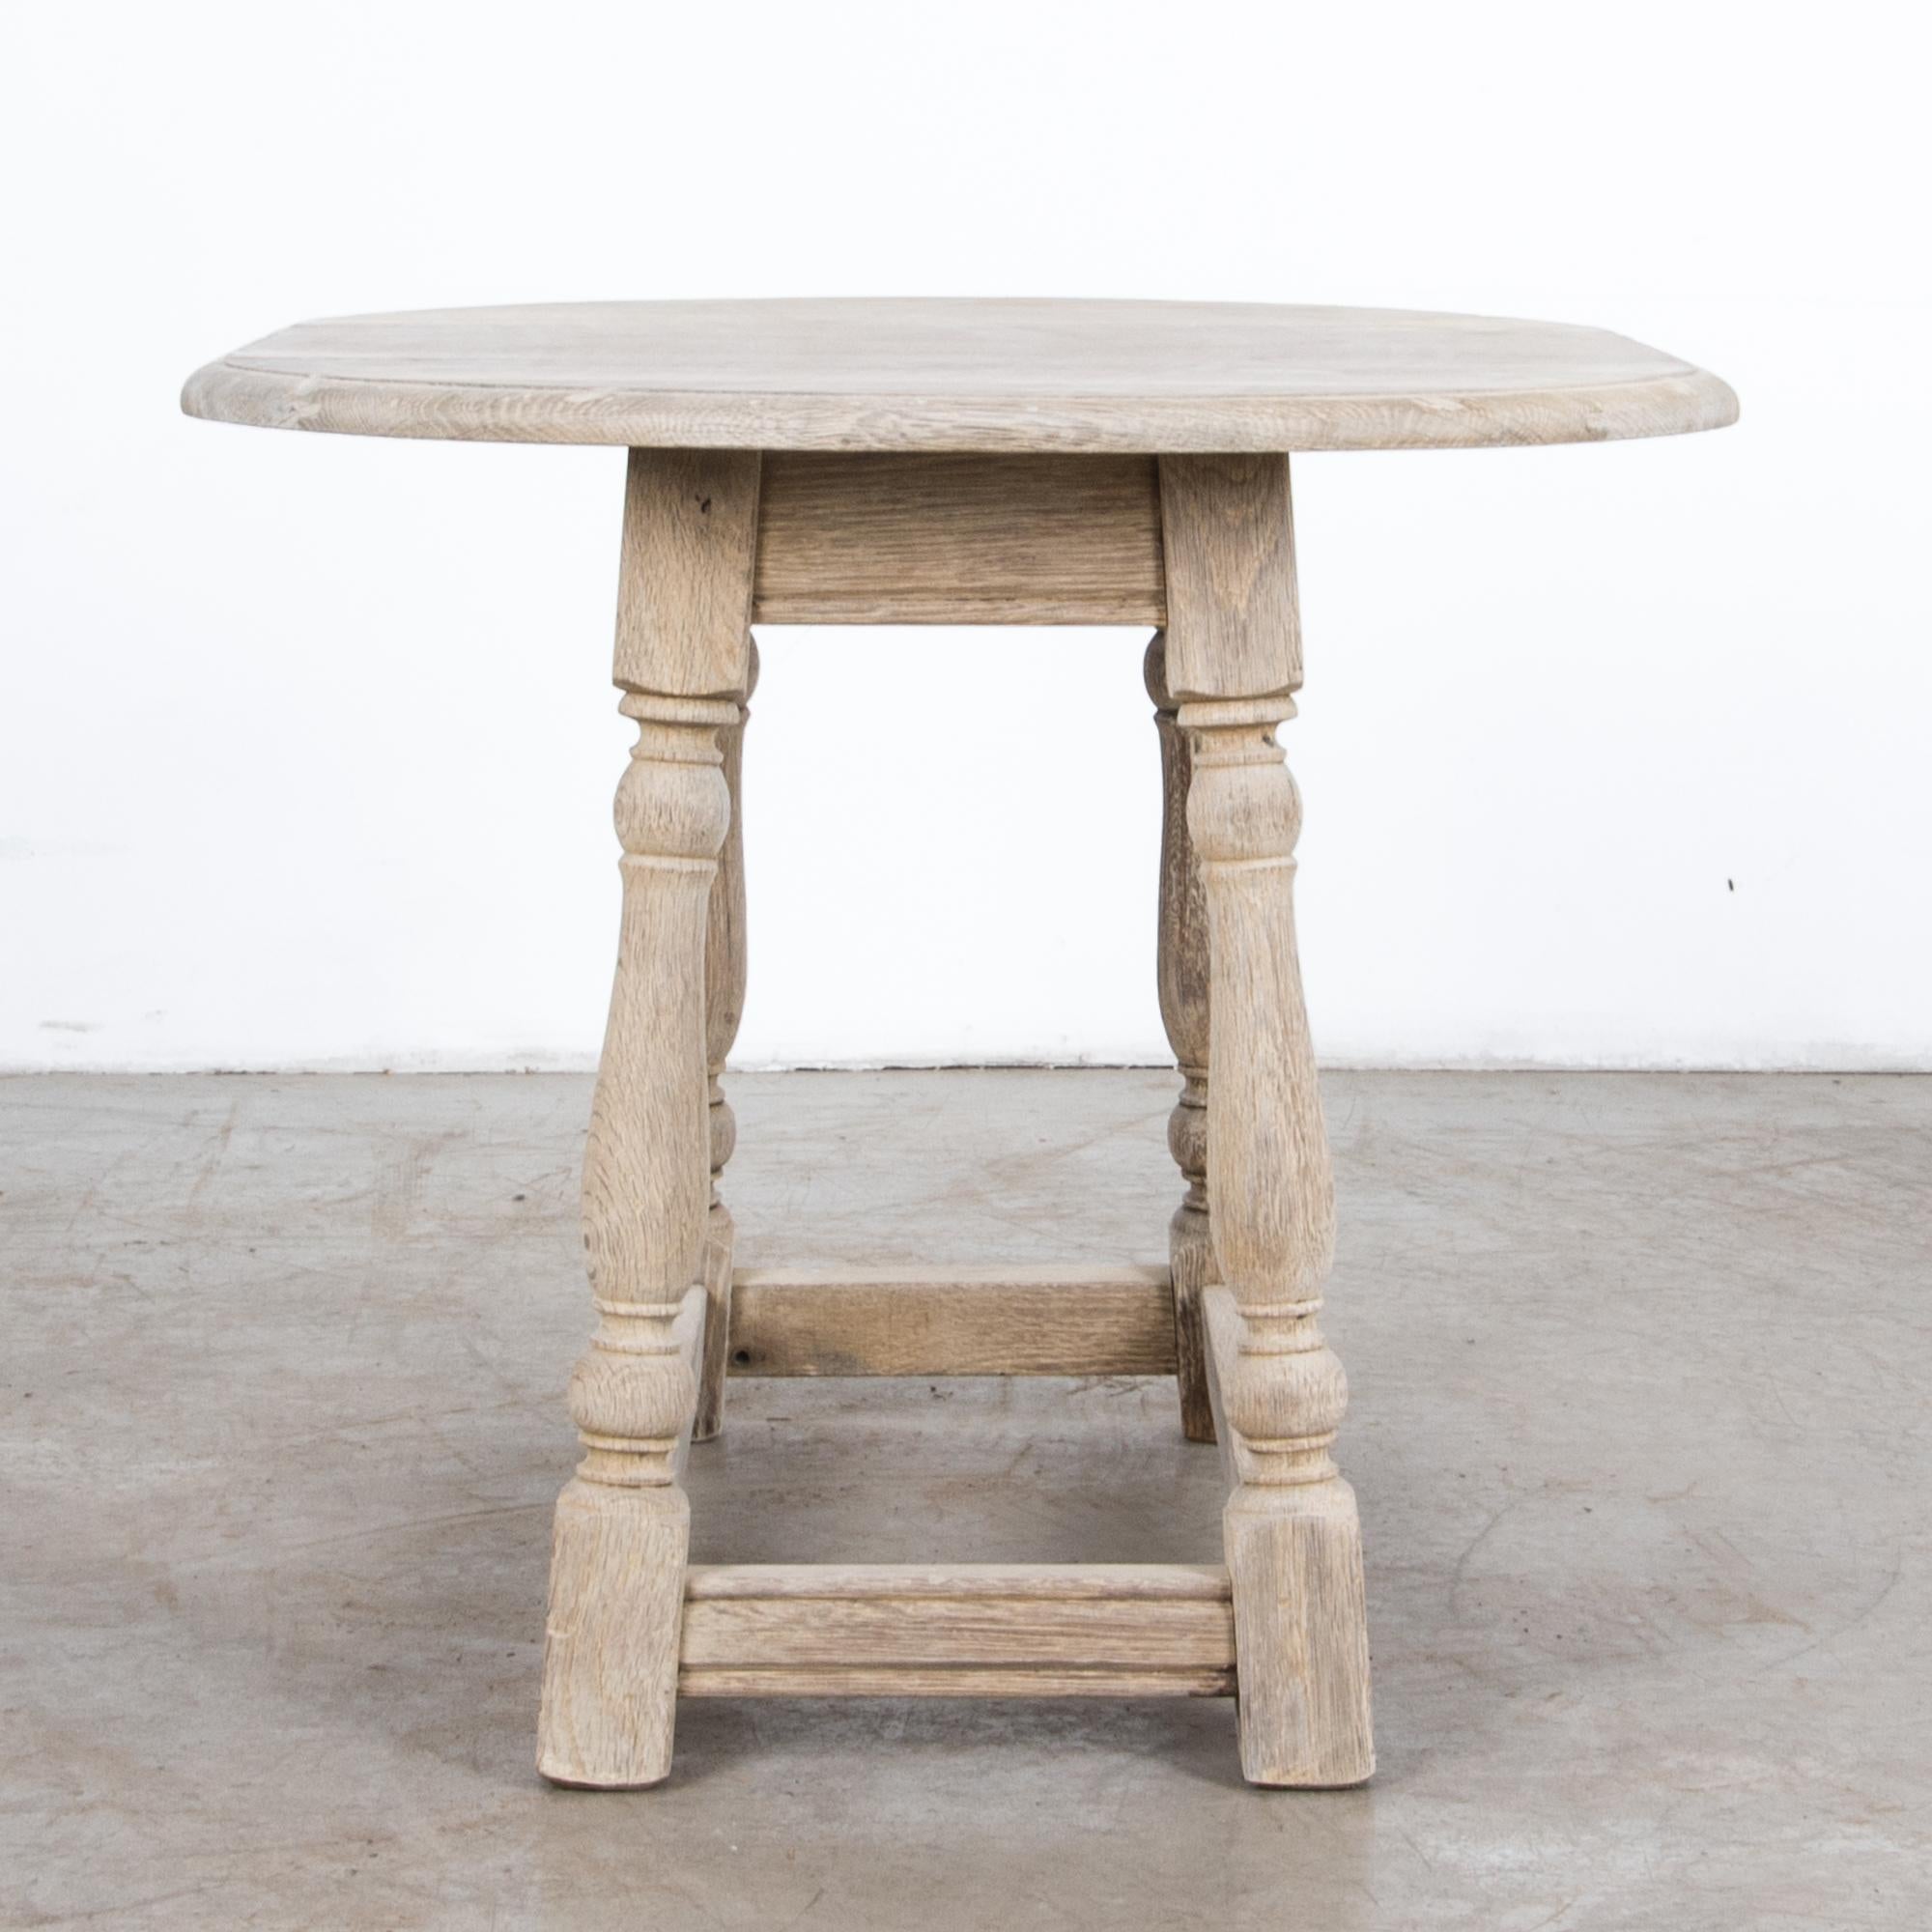 A simple and rustic table from Belgium, circa 1950. A midcentury Belgian fashion, traditional furniture forms are simplified, updated through a contemporary lens. Turned oak legs and carved detail suggest classical motifs.